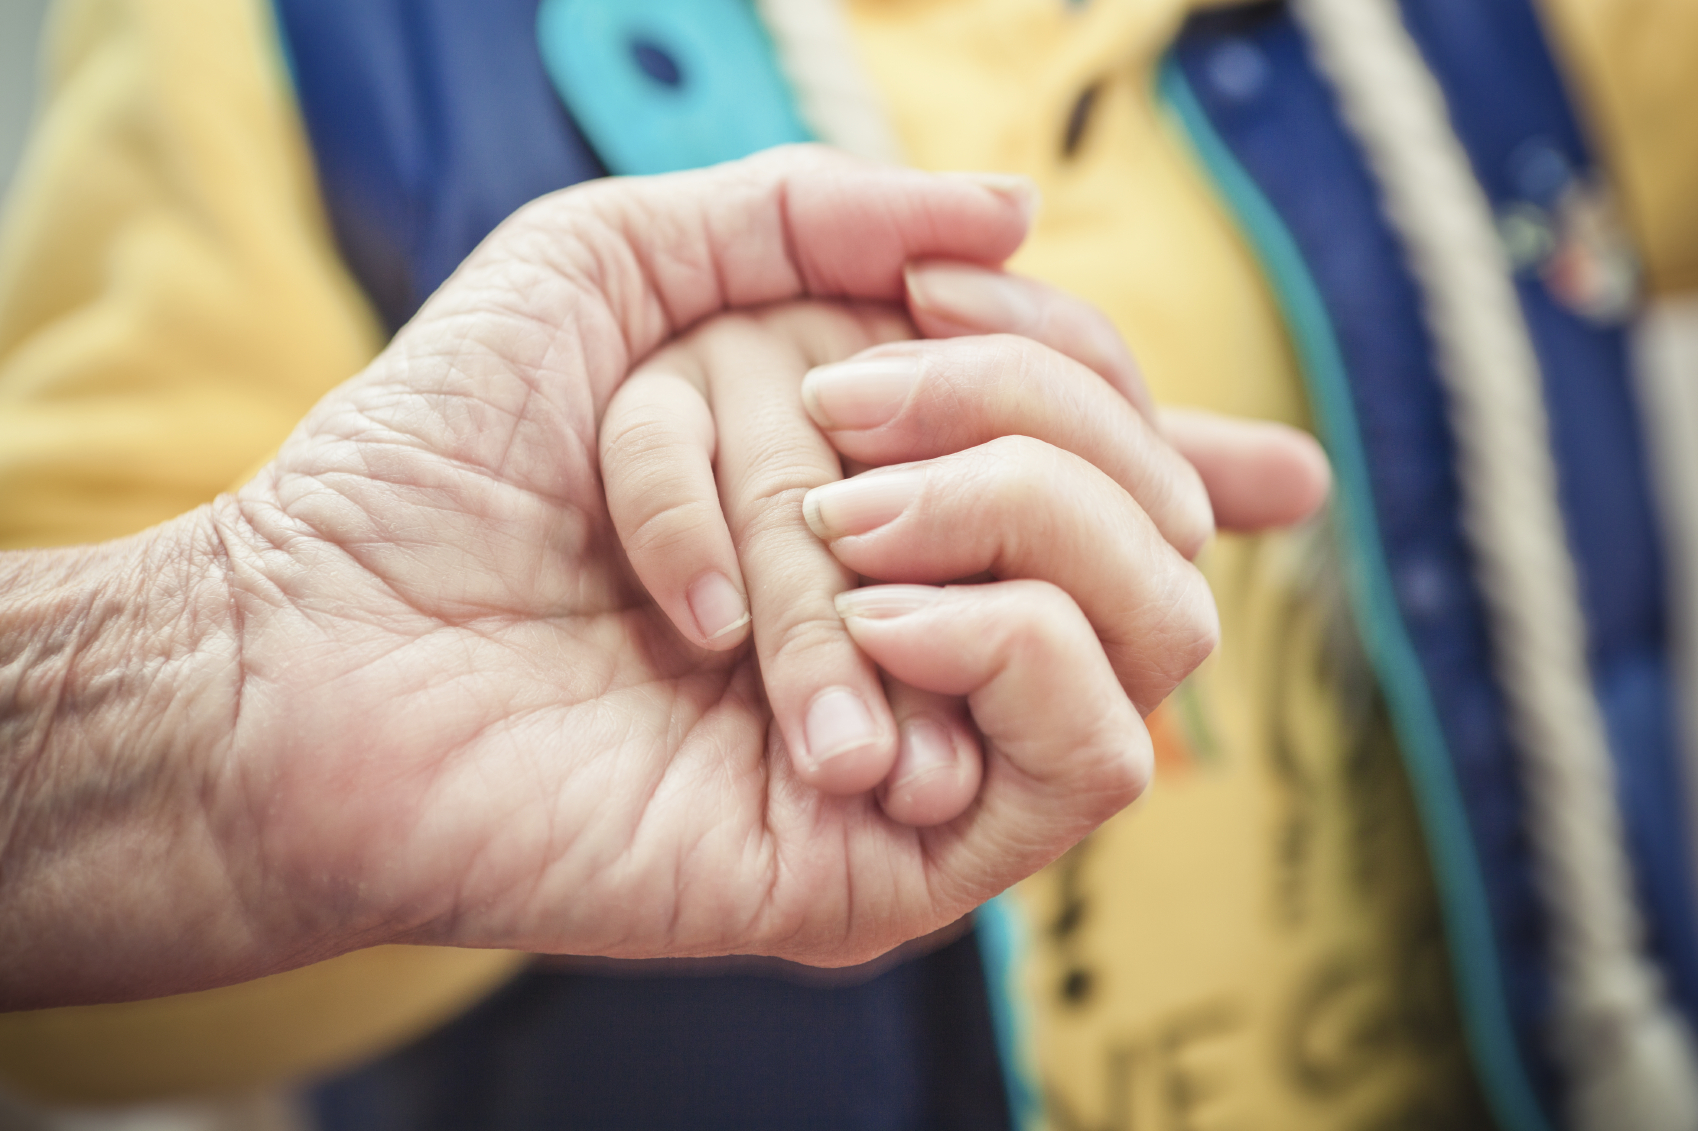 An older person's hand grasps a younger person's hand.